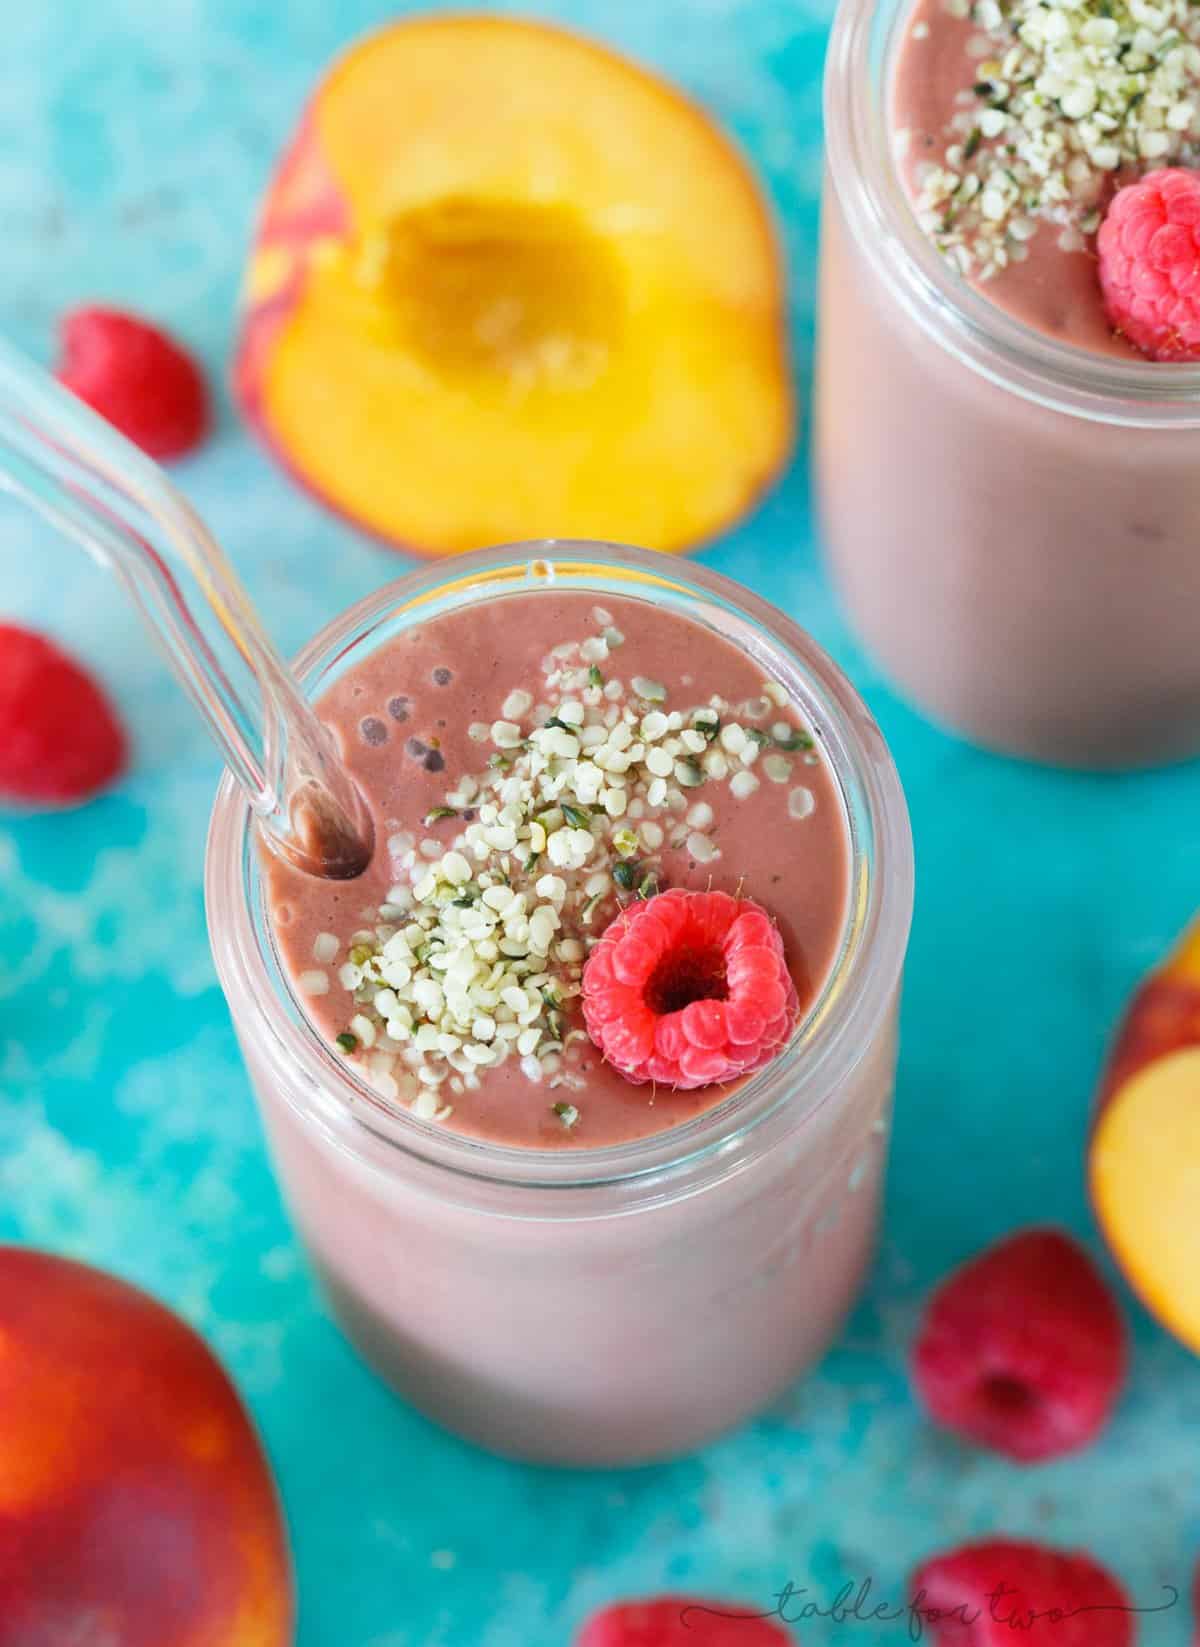 You won't believe that there is spinach in this raspberry peach spinach smoothie! The name doesn't do this smoothie justice as you cannot taste or see the spinach in this! Such a great way to get your daily greens in without the fight!